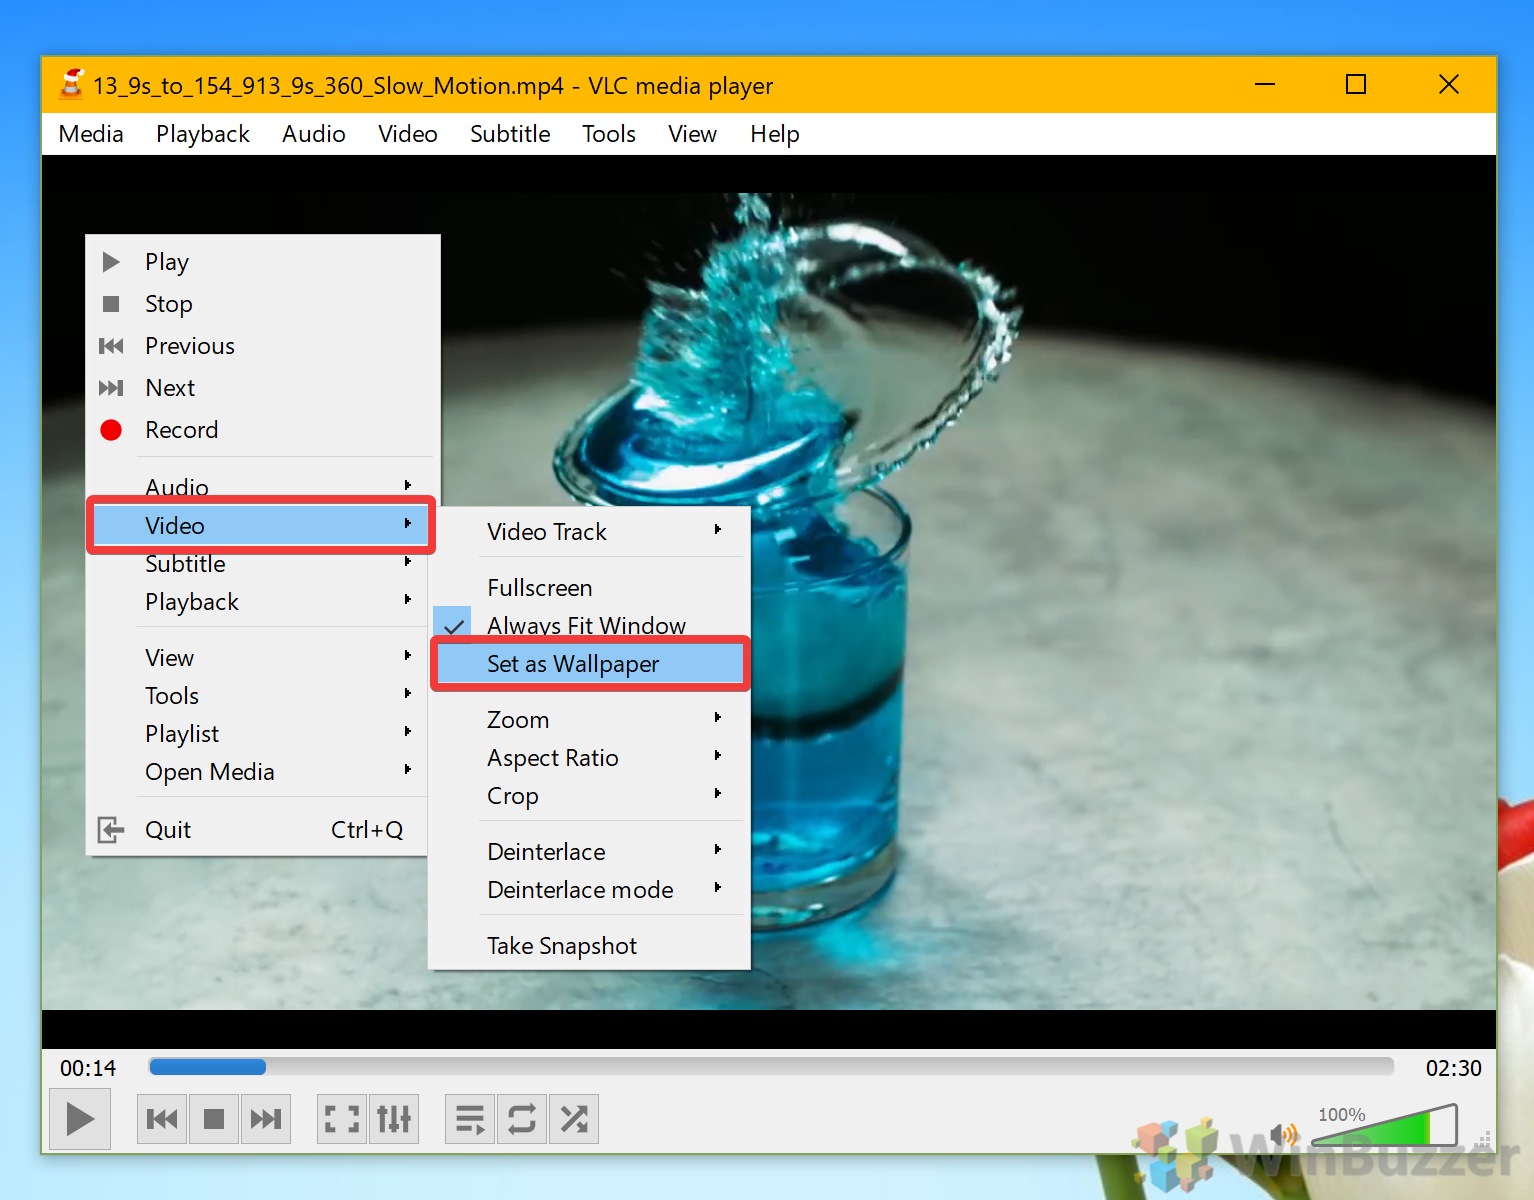 how to set gif as wallpaper vlc player on windows 10